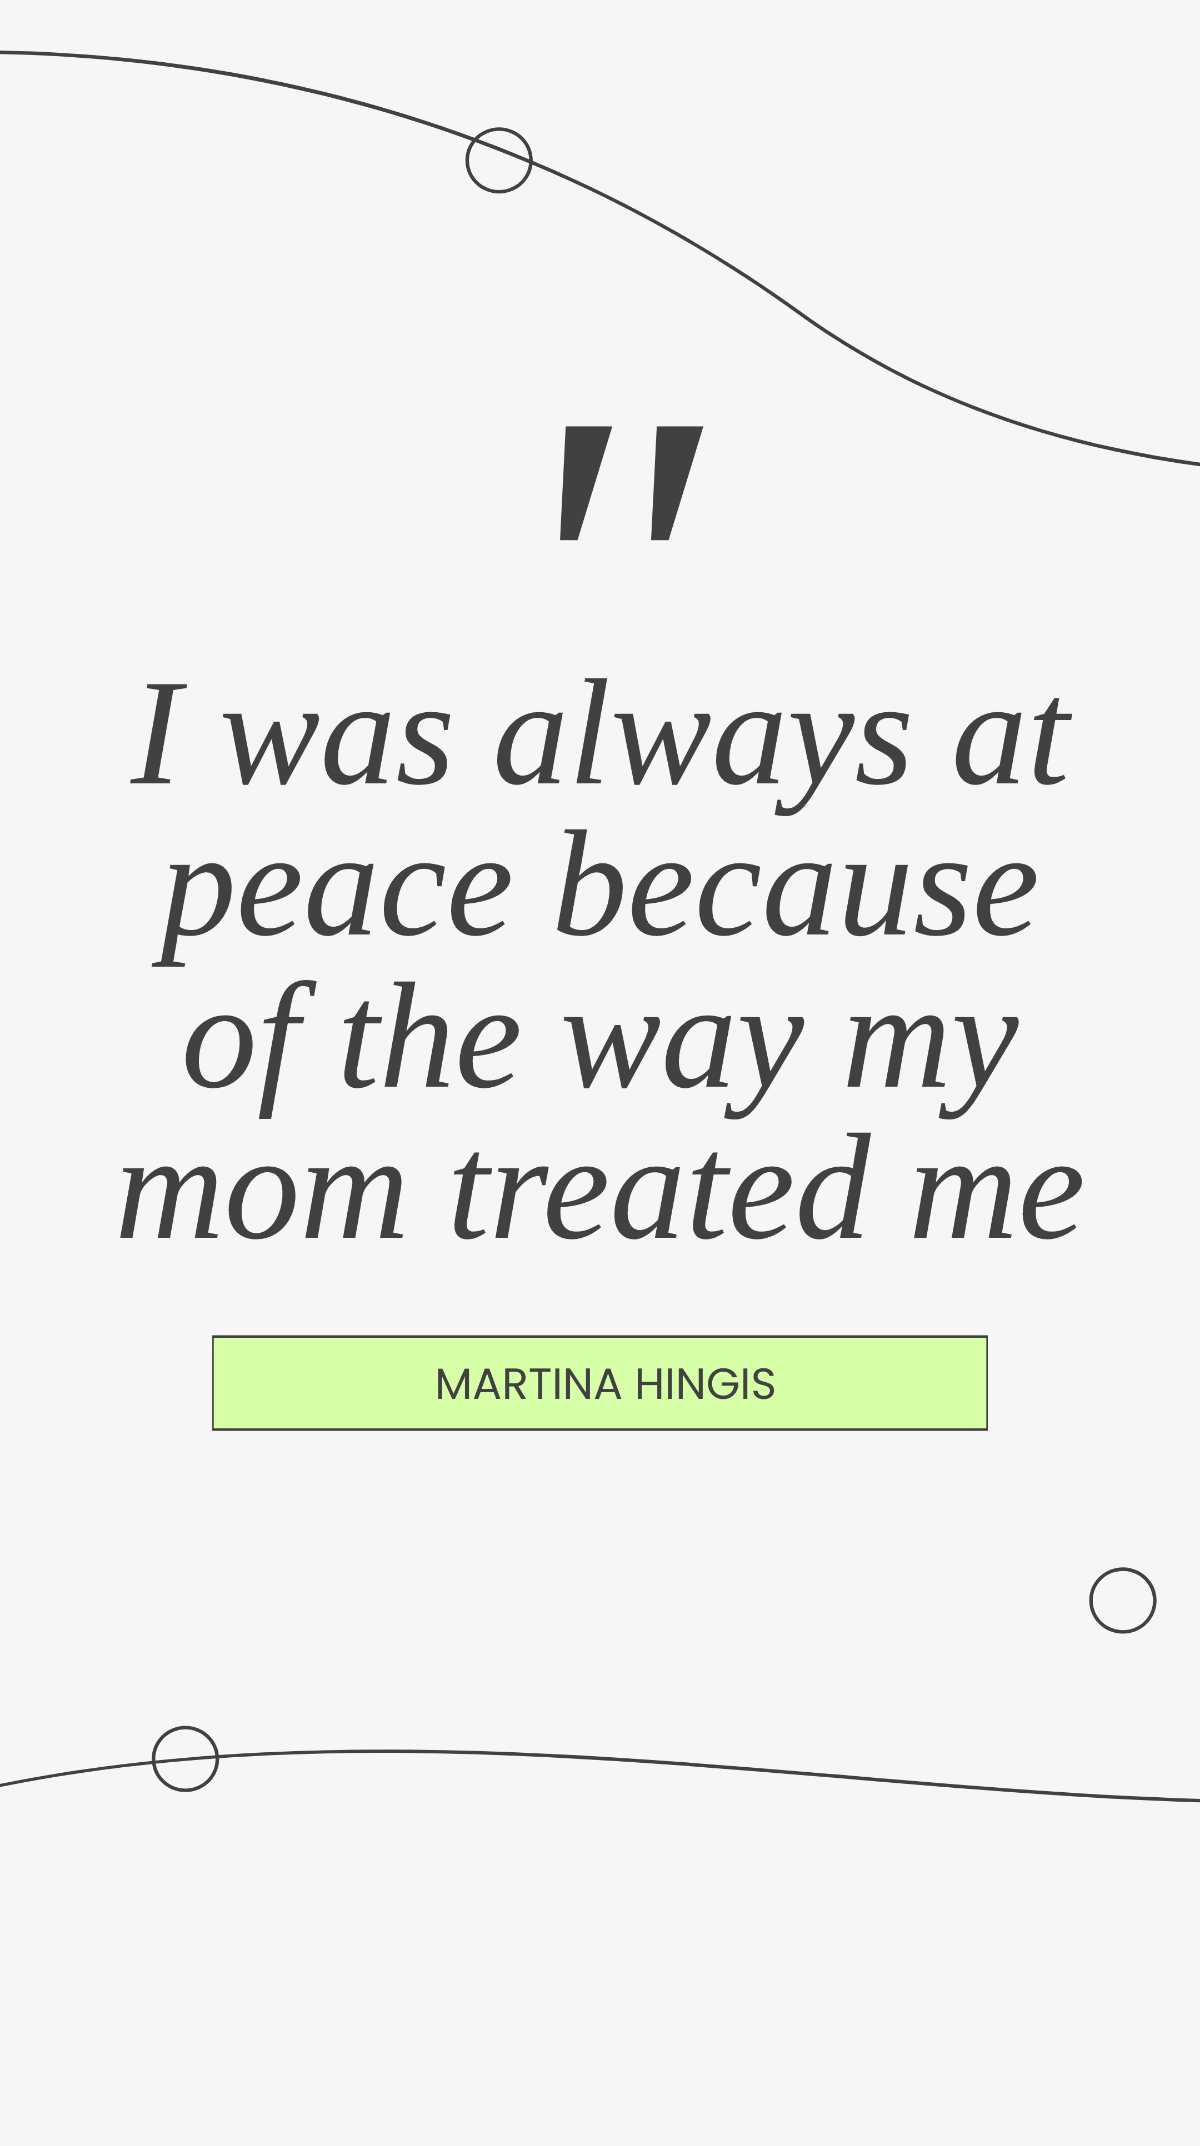 Martina Hingis - I was always at peace because of the way my mom treated me.  Template